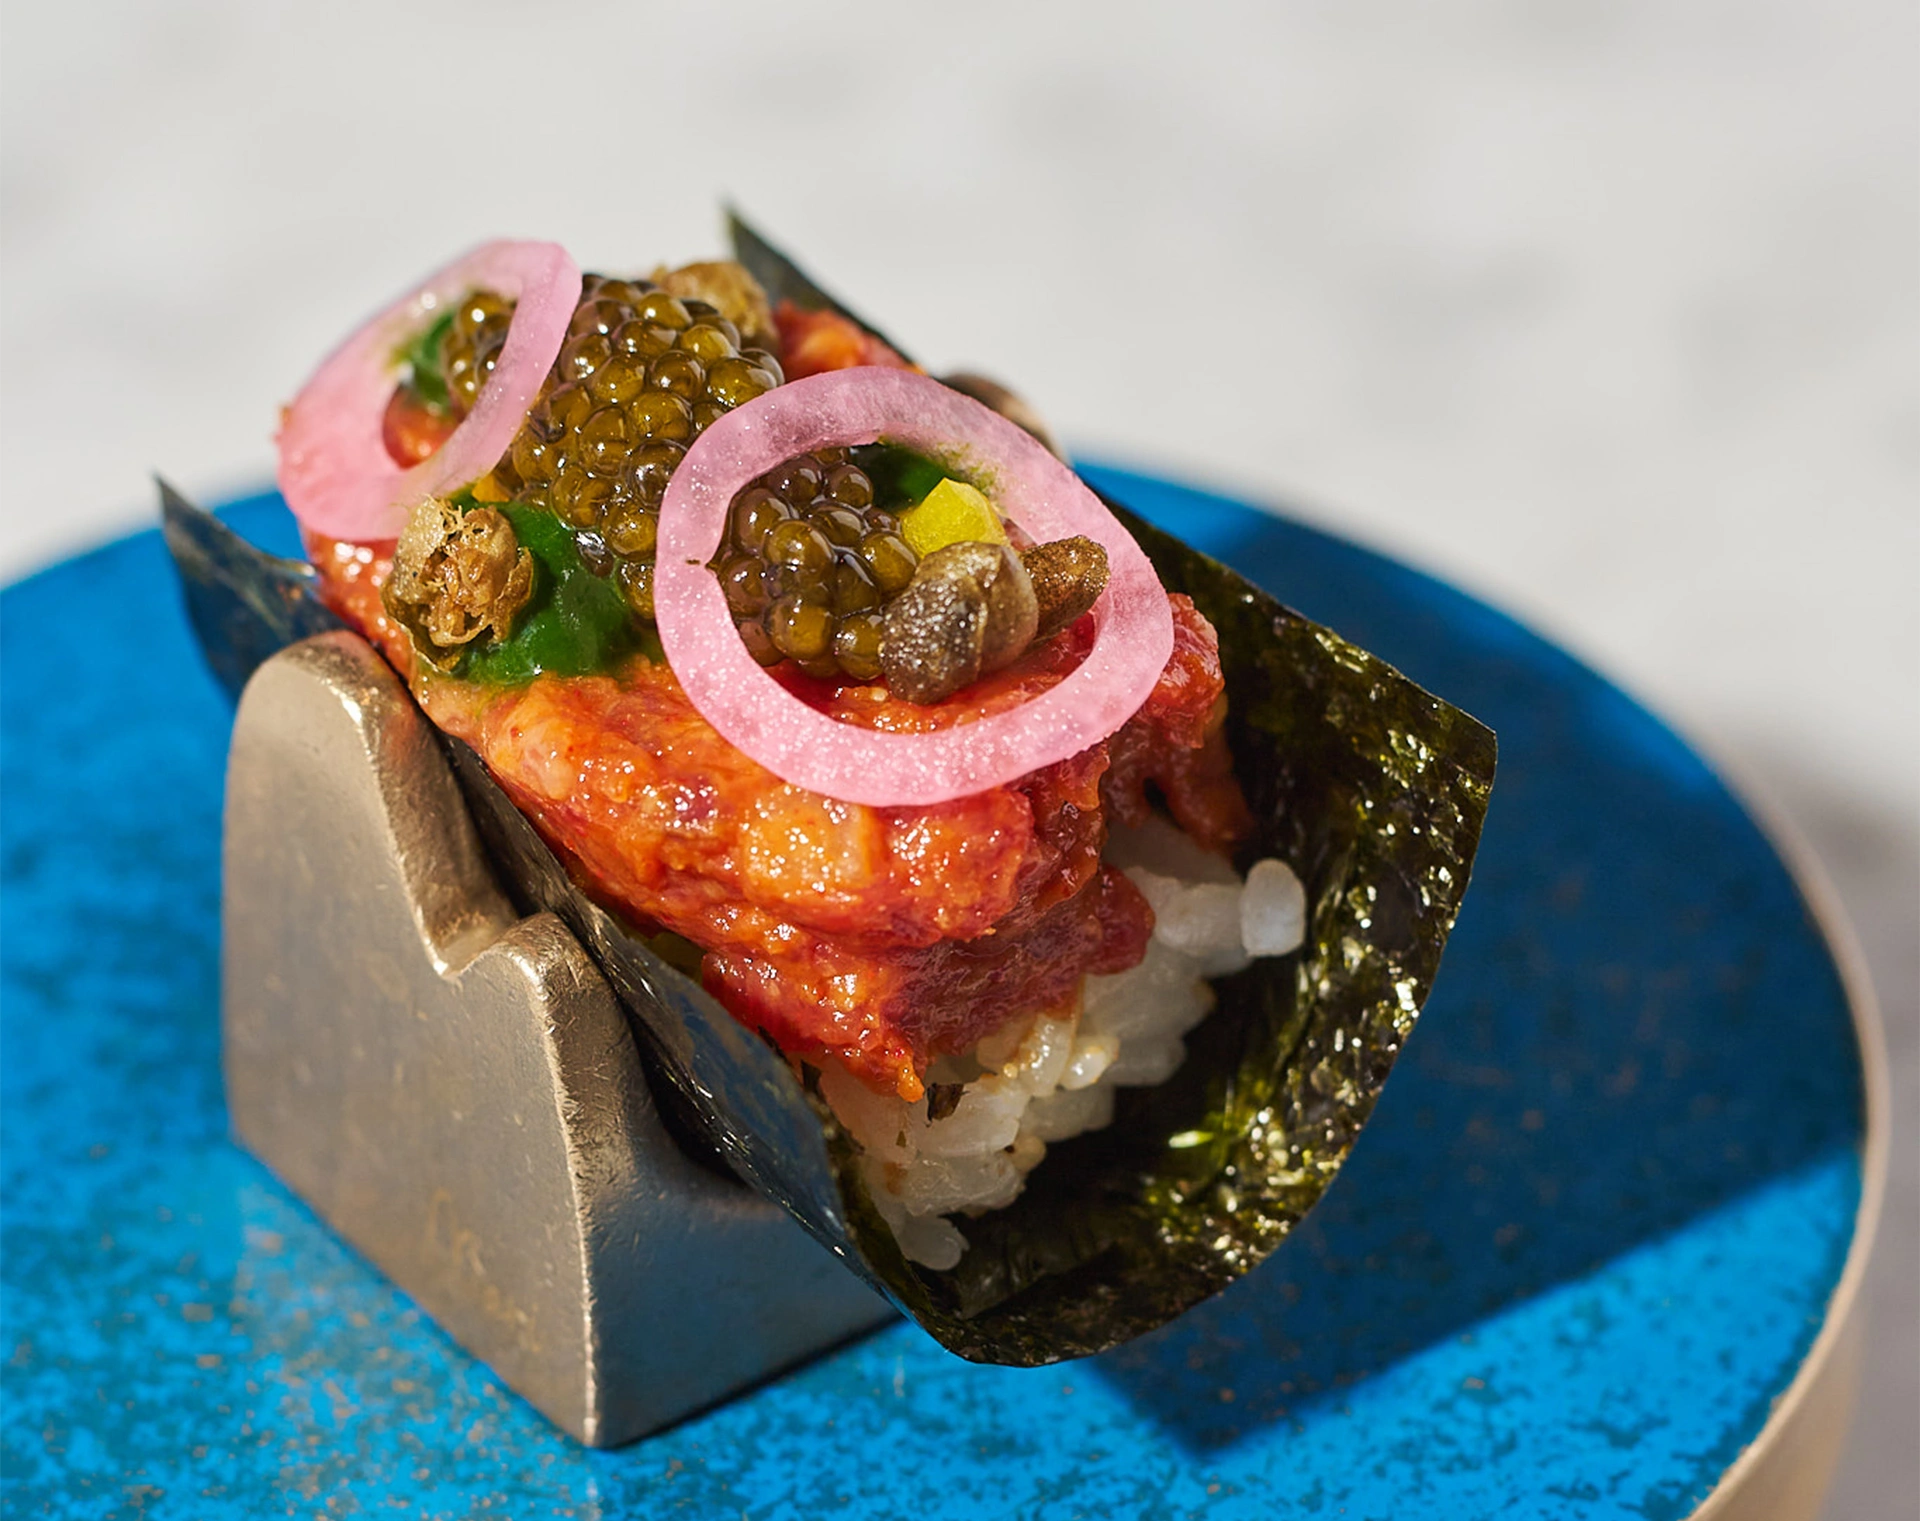 Mari, Michelin star offering an innovative twist on omakase with Korean flavors.